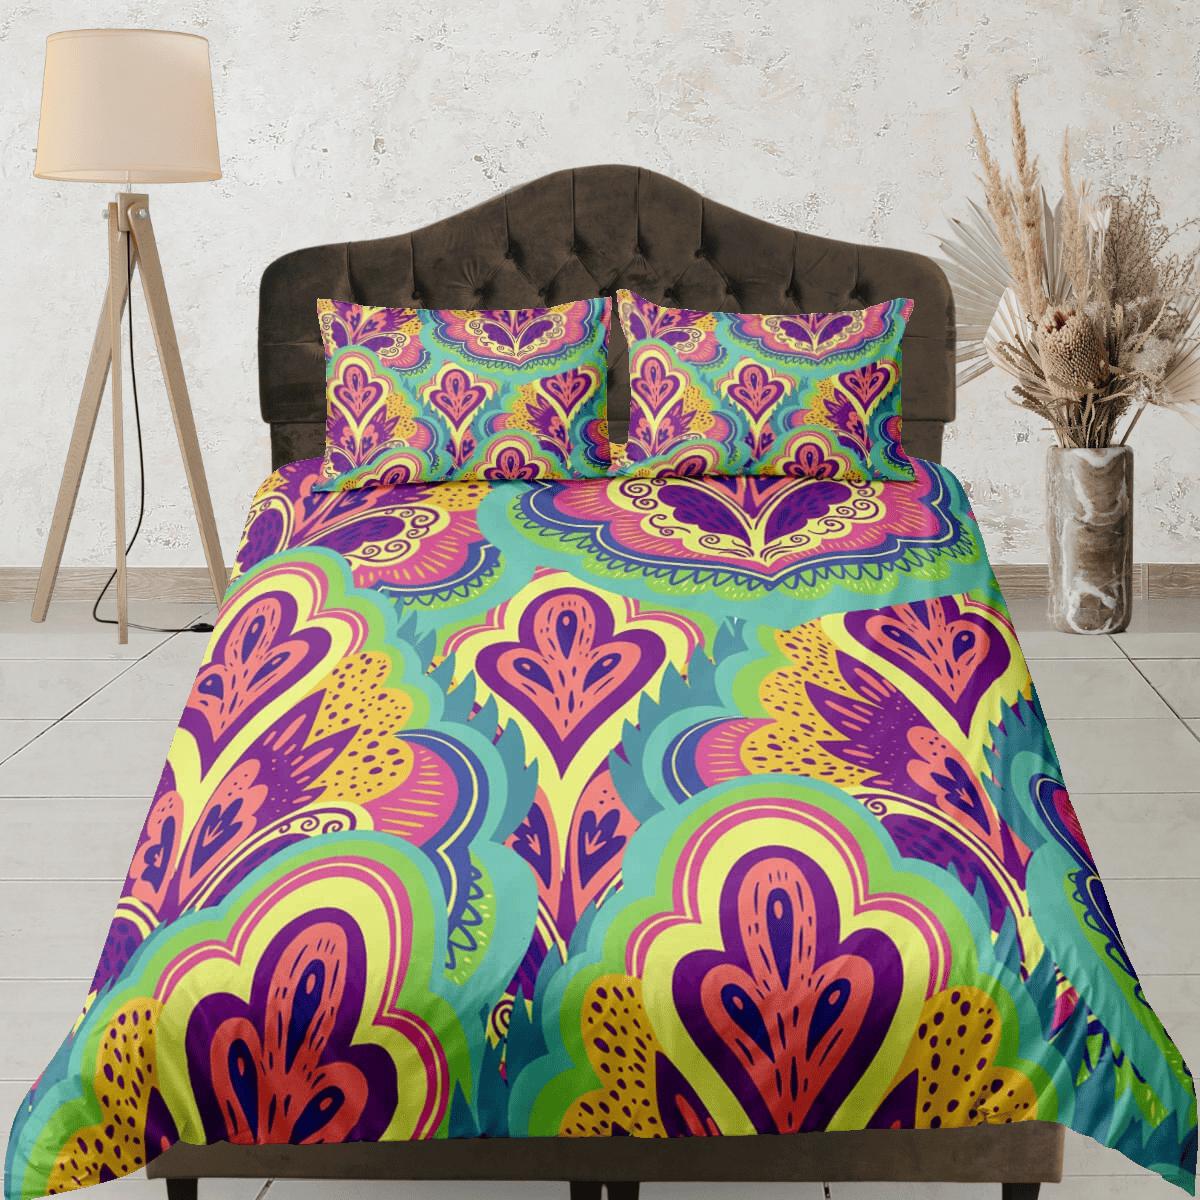 daintyduvet Artistic bright colors paisley duvet cover set, aesthetic room decor bedding set full, king, queen size, abstract boho bedspread